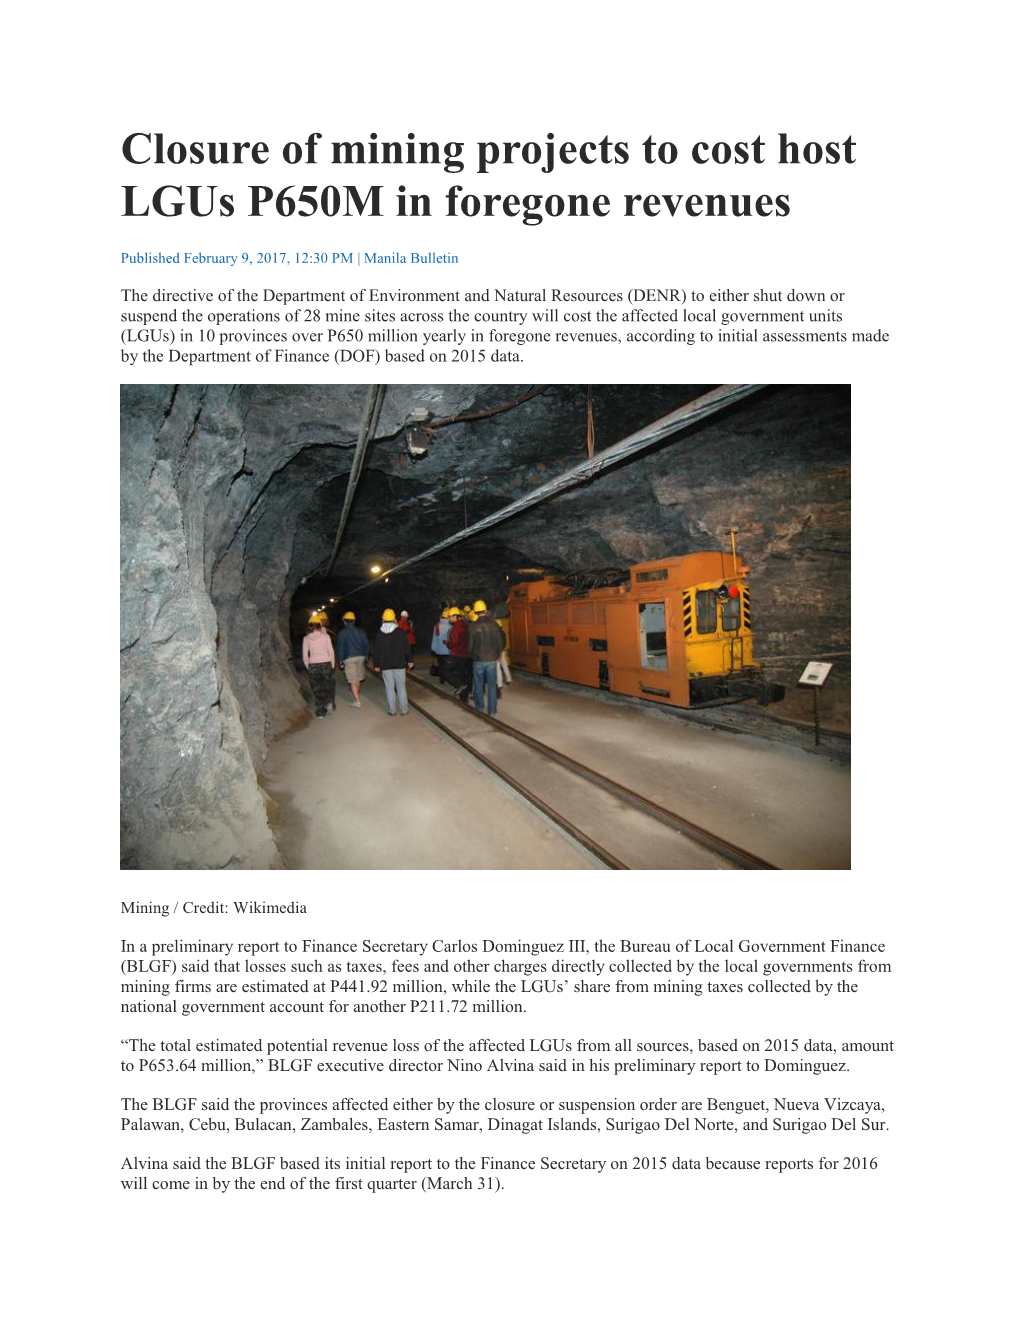 Closure of Mining Projects to Cost Host Lgus P650M in Foregone Revenues